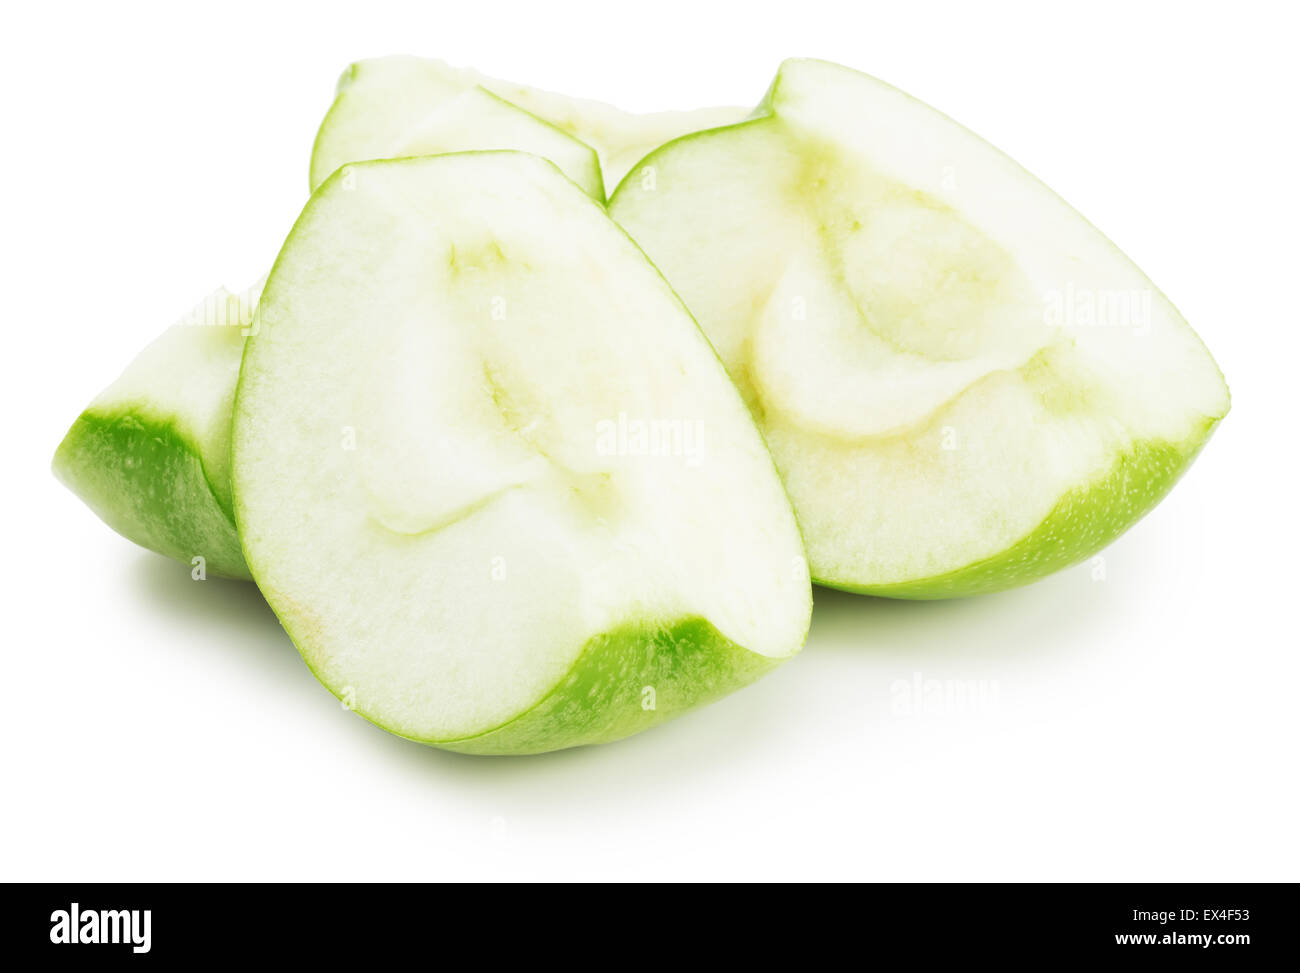 green apple slices isolated on the white background. Stock Photo